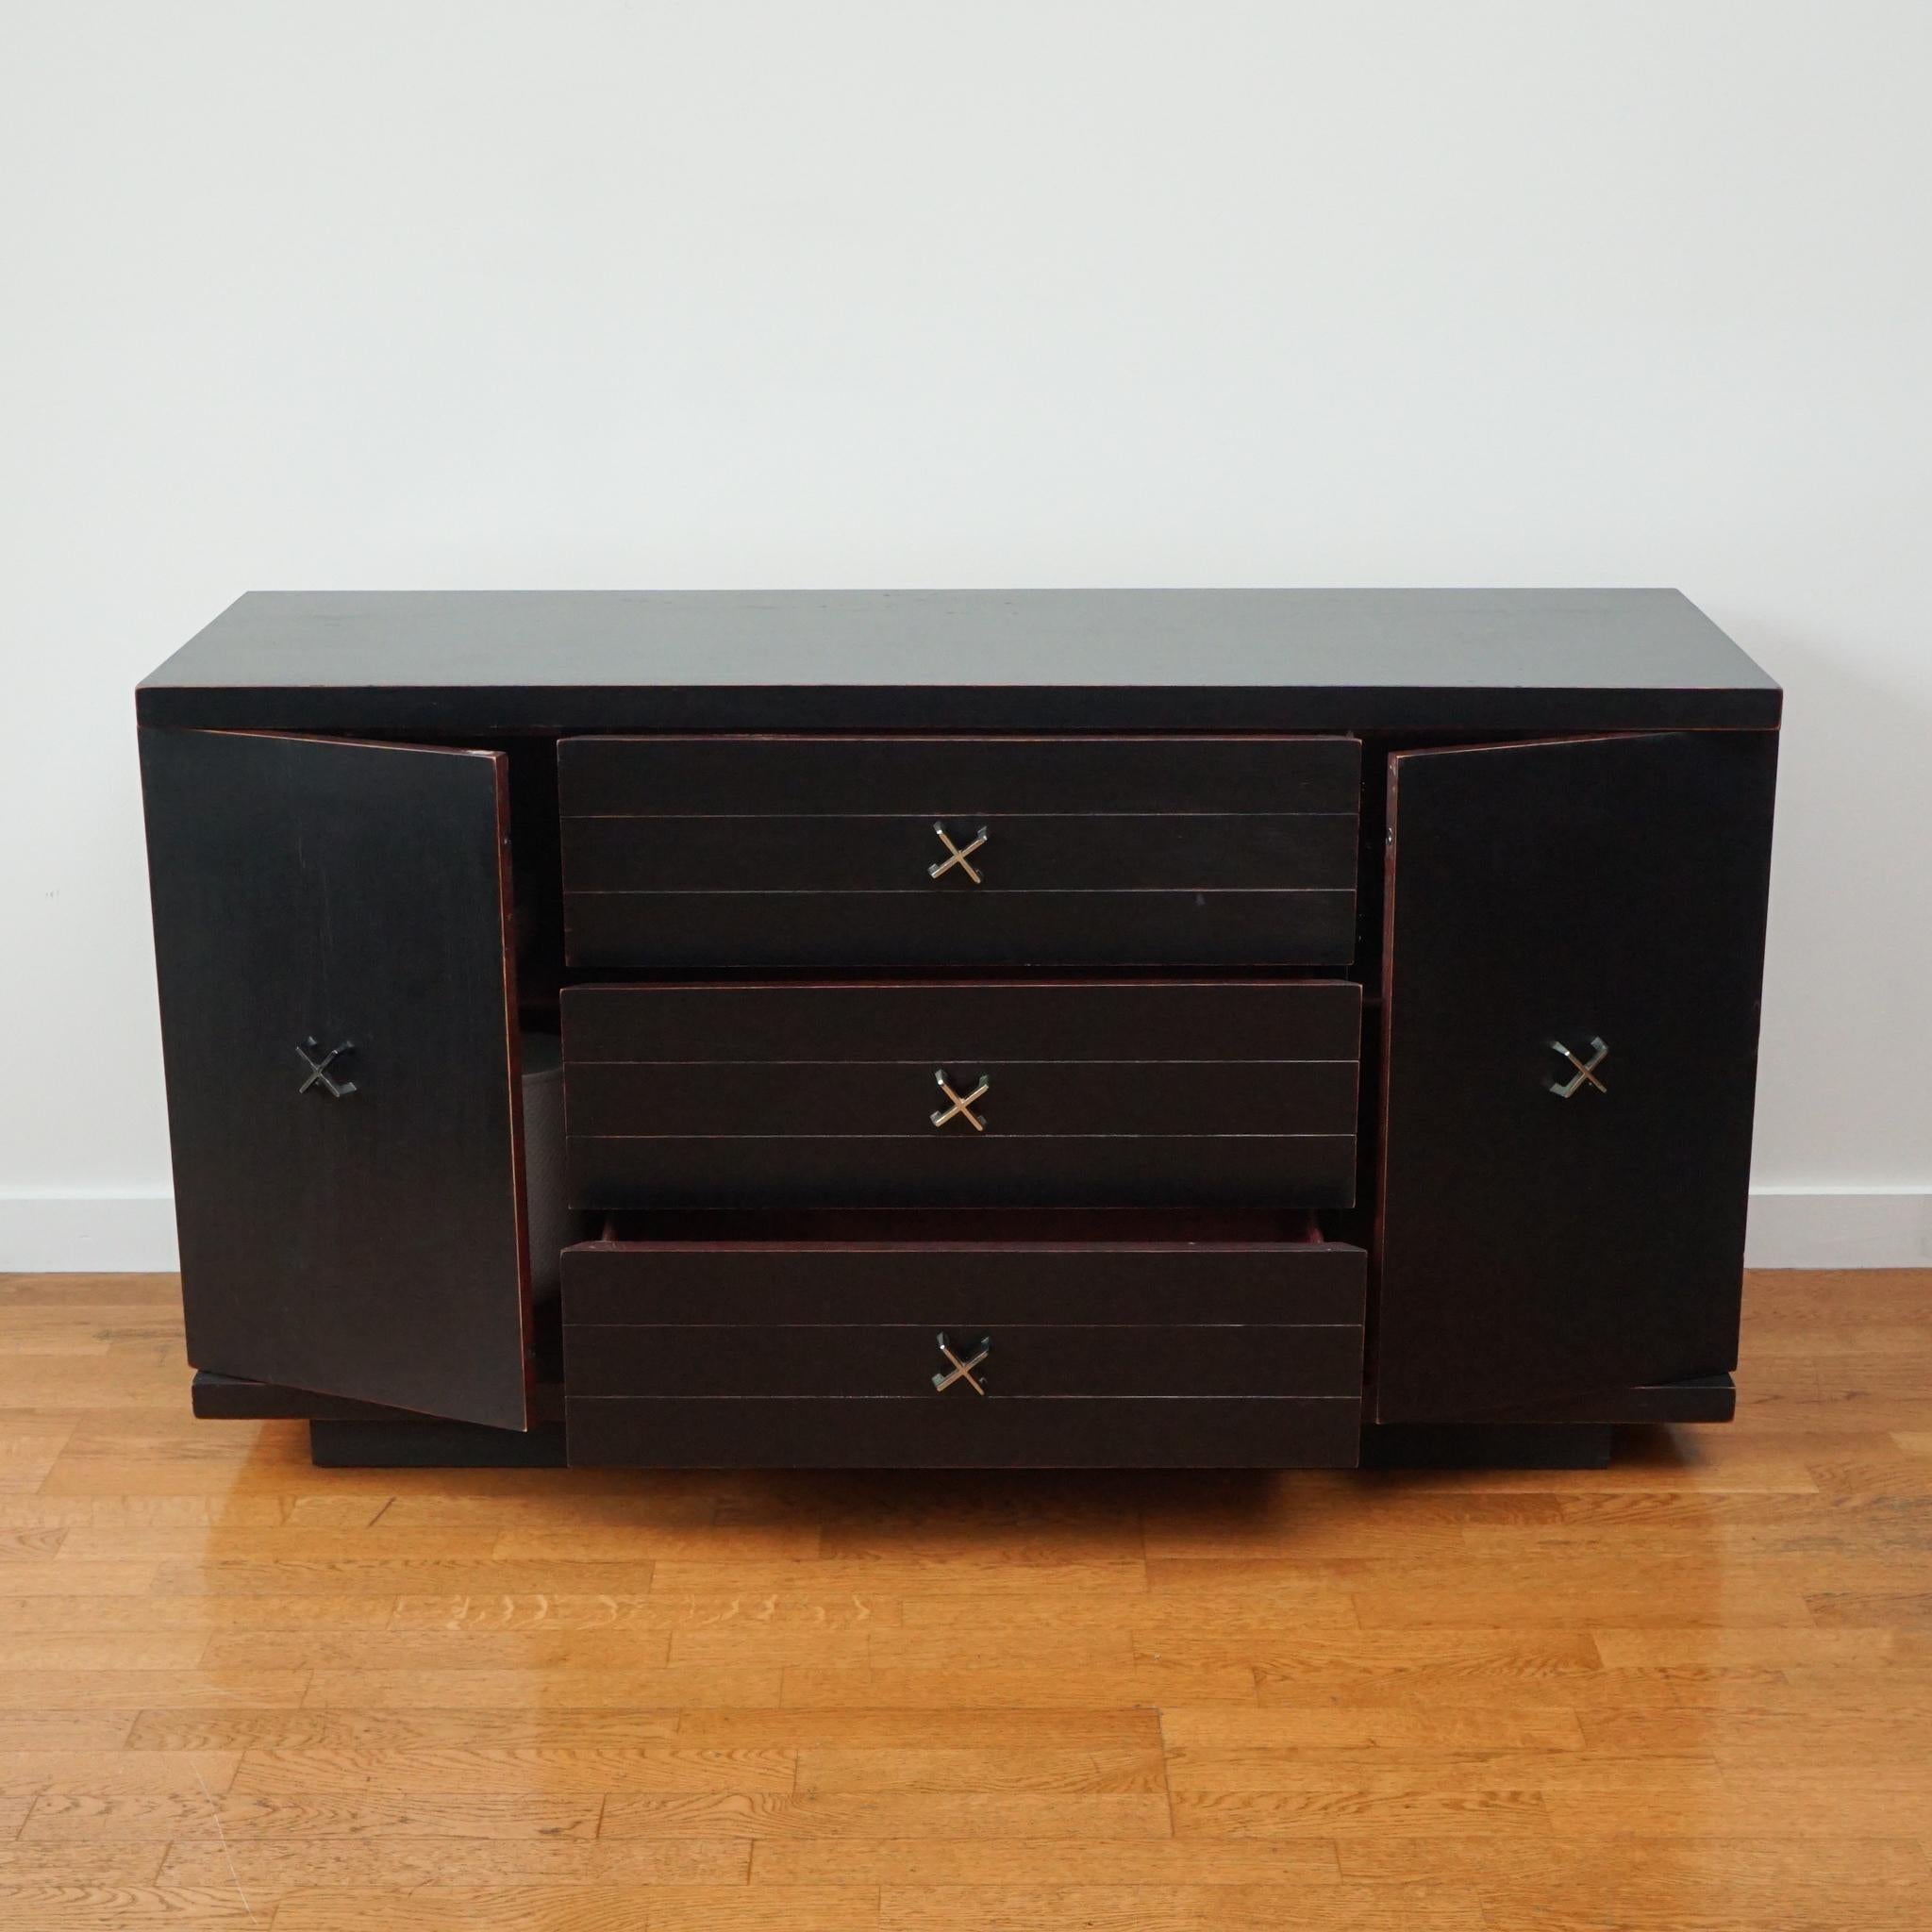 North American Mid-Century Modern Sideboard in Distressed Matte Black Finish For Sale